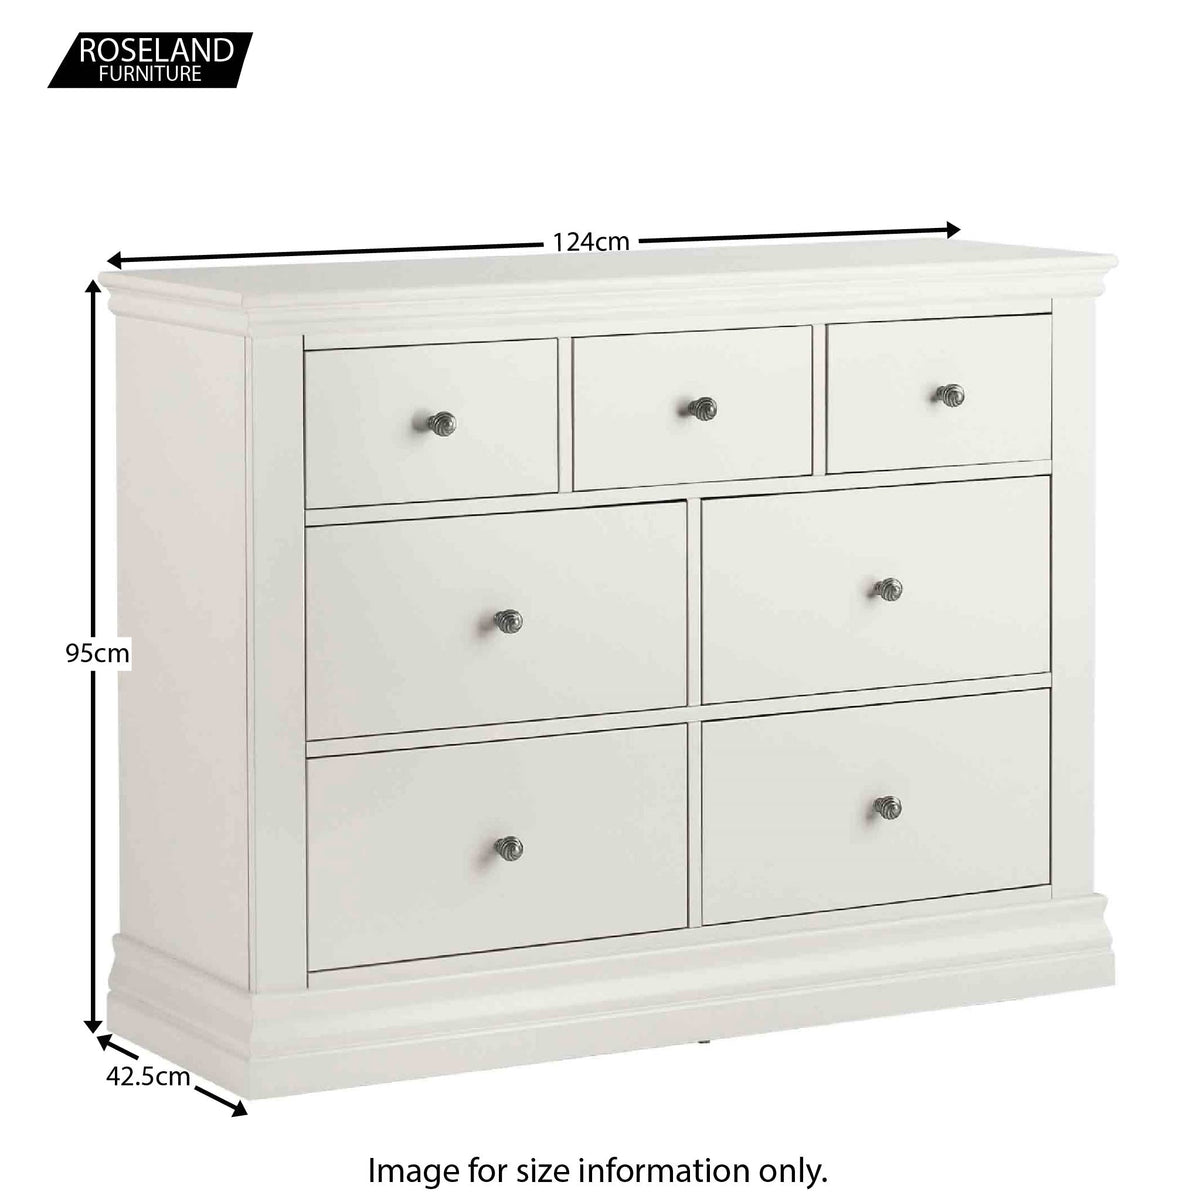 Dimensions for the Melrose White 3 over 4 Chest of Drawers from Roseland Furniture